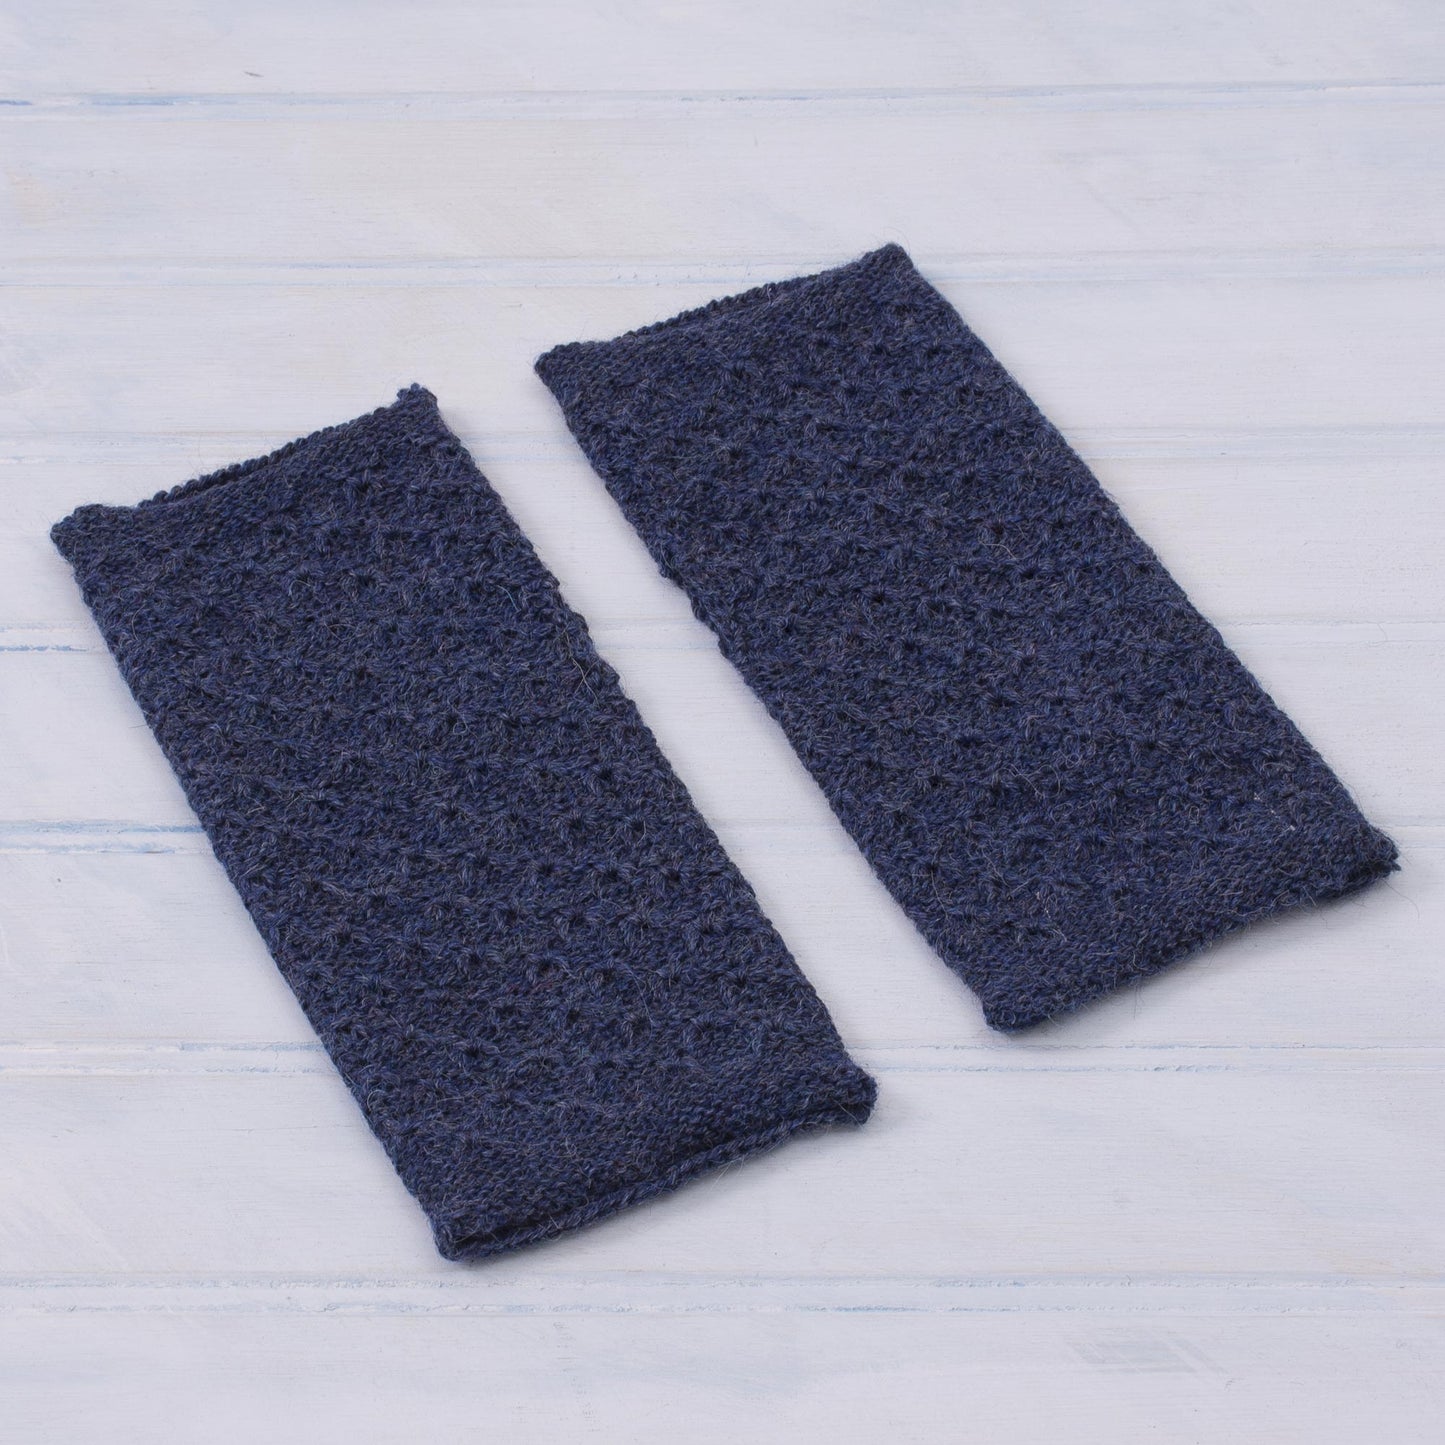 Passionate Pattern in Indigo Patterned 100% Baby Alpaca Fingerless Mitts from Peru